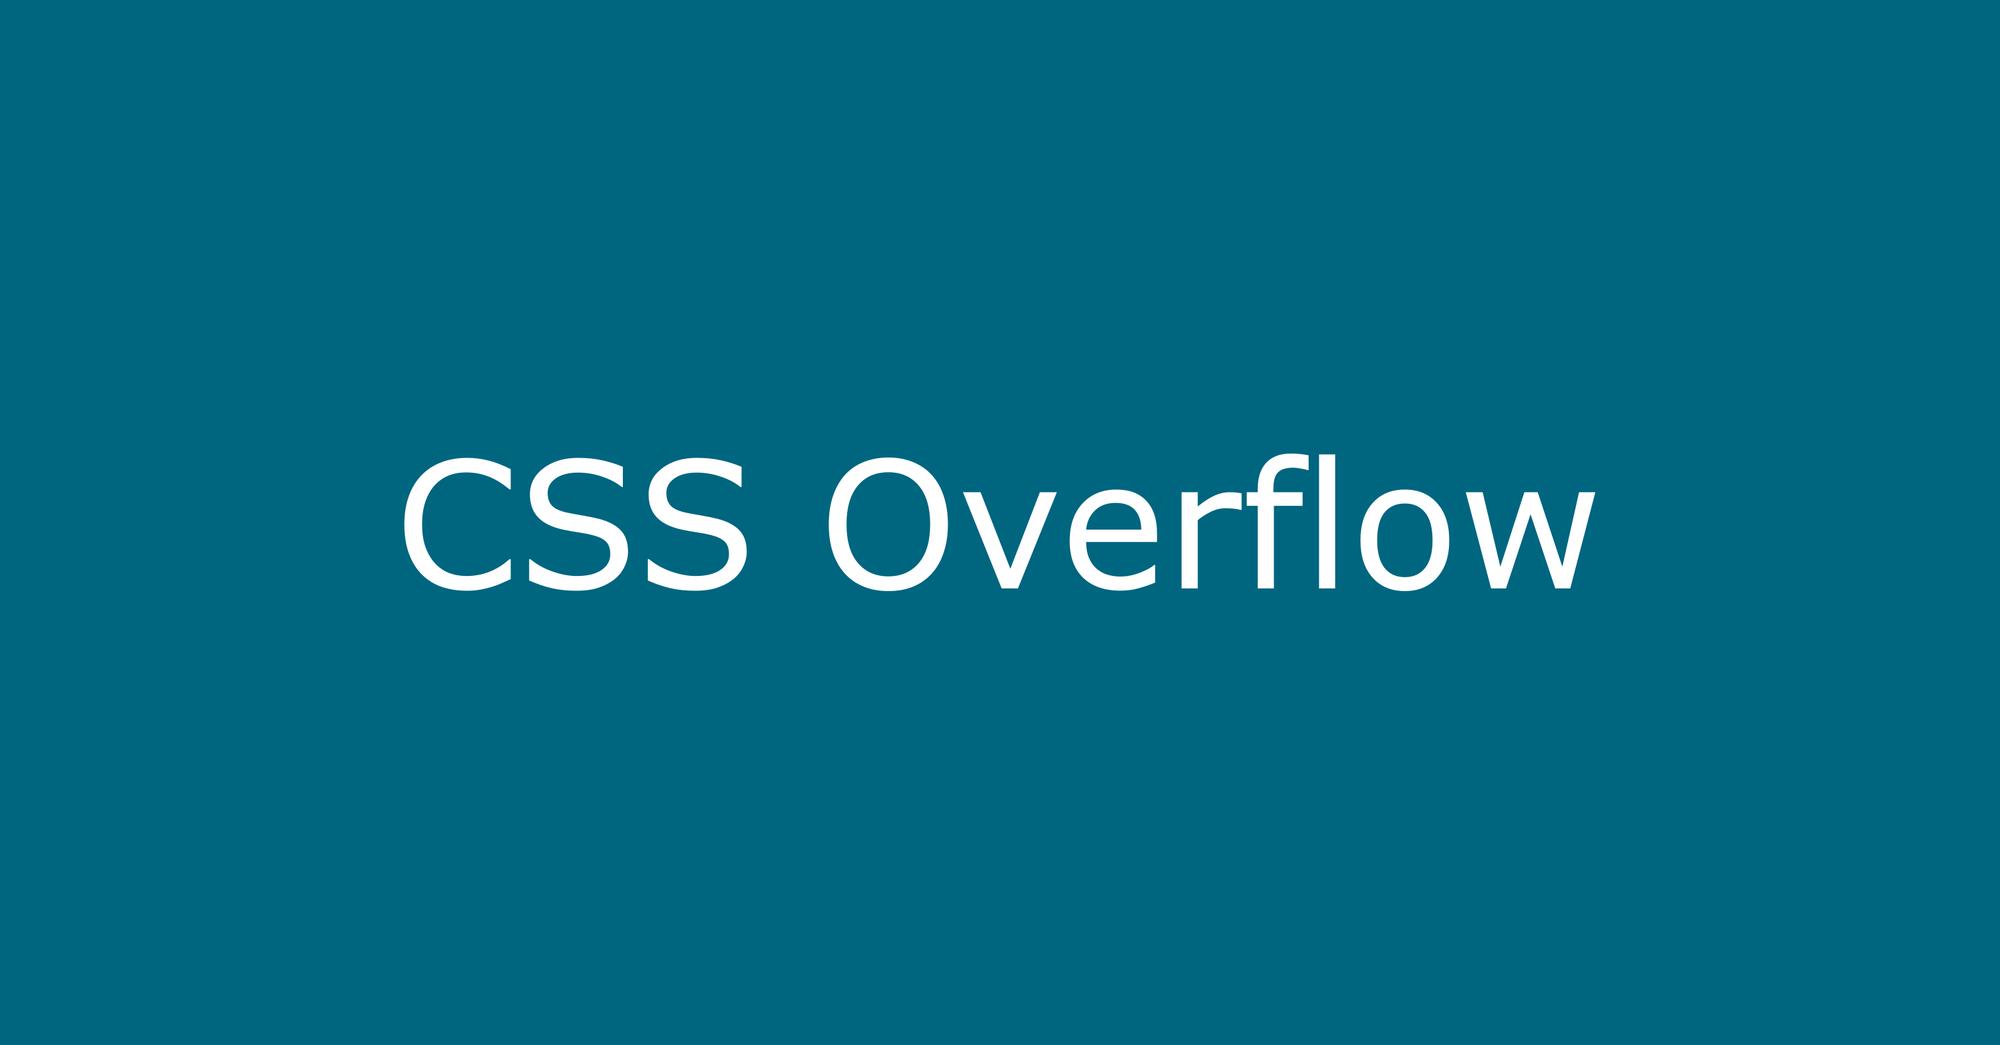 CSS Overflow – Visible, Scroll, Auto, or Hidden? The Overflow Property Explained